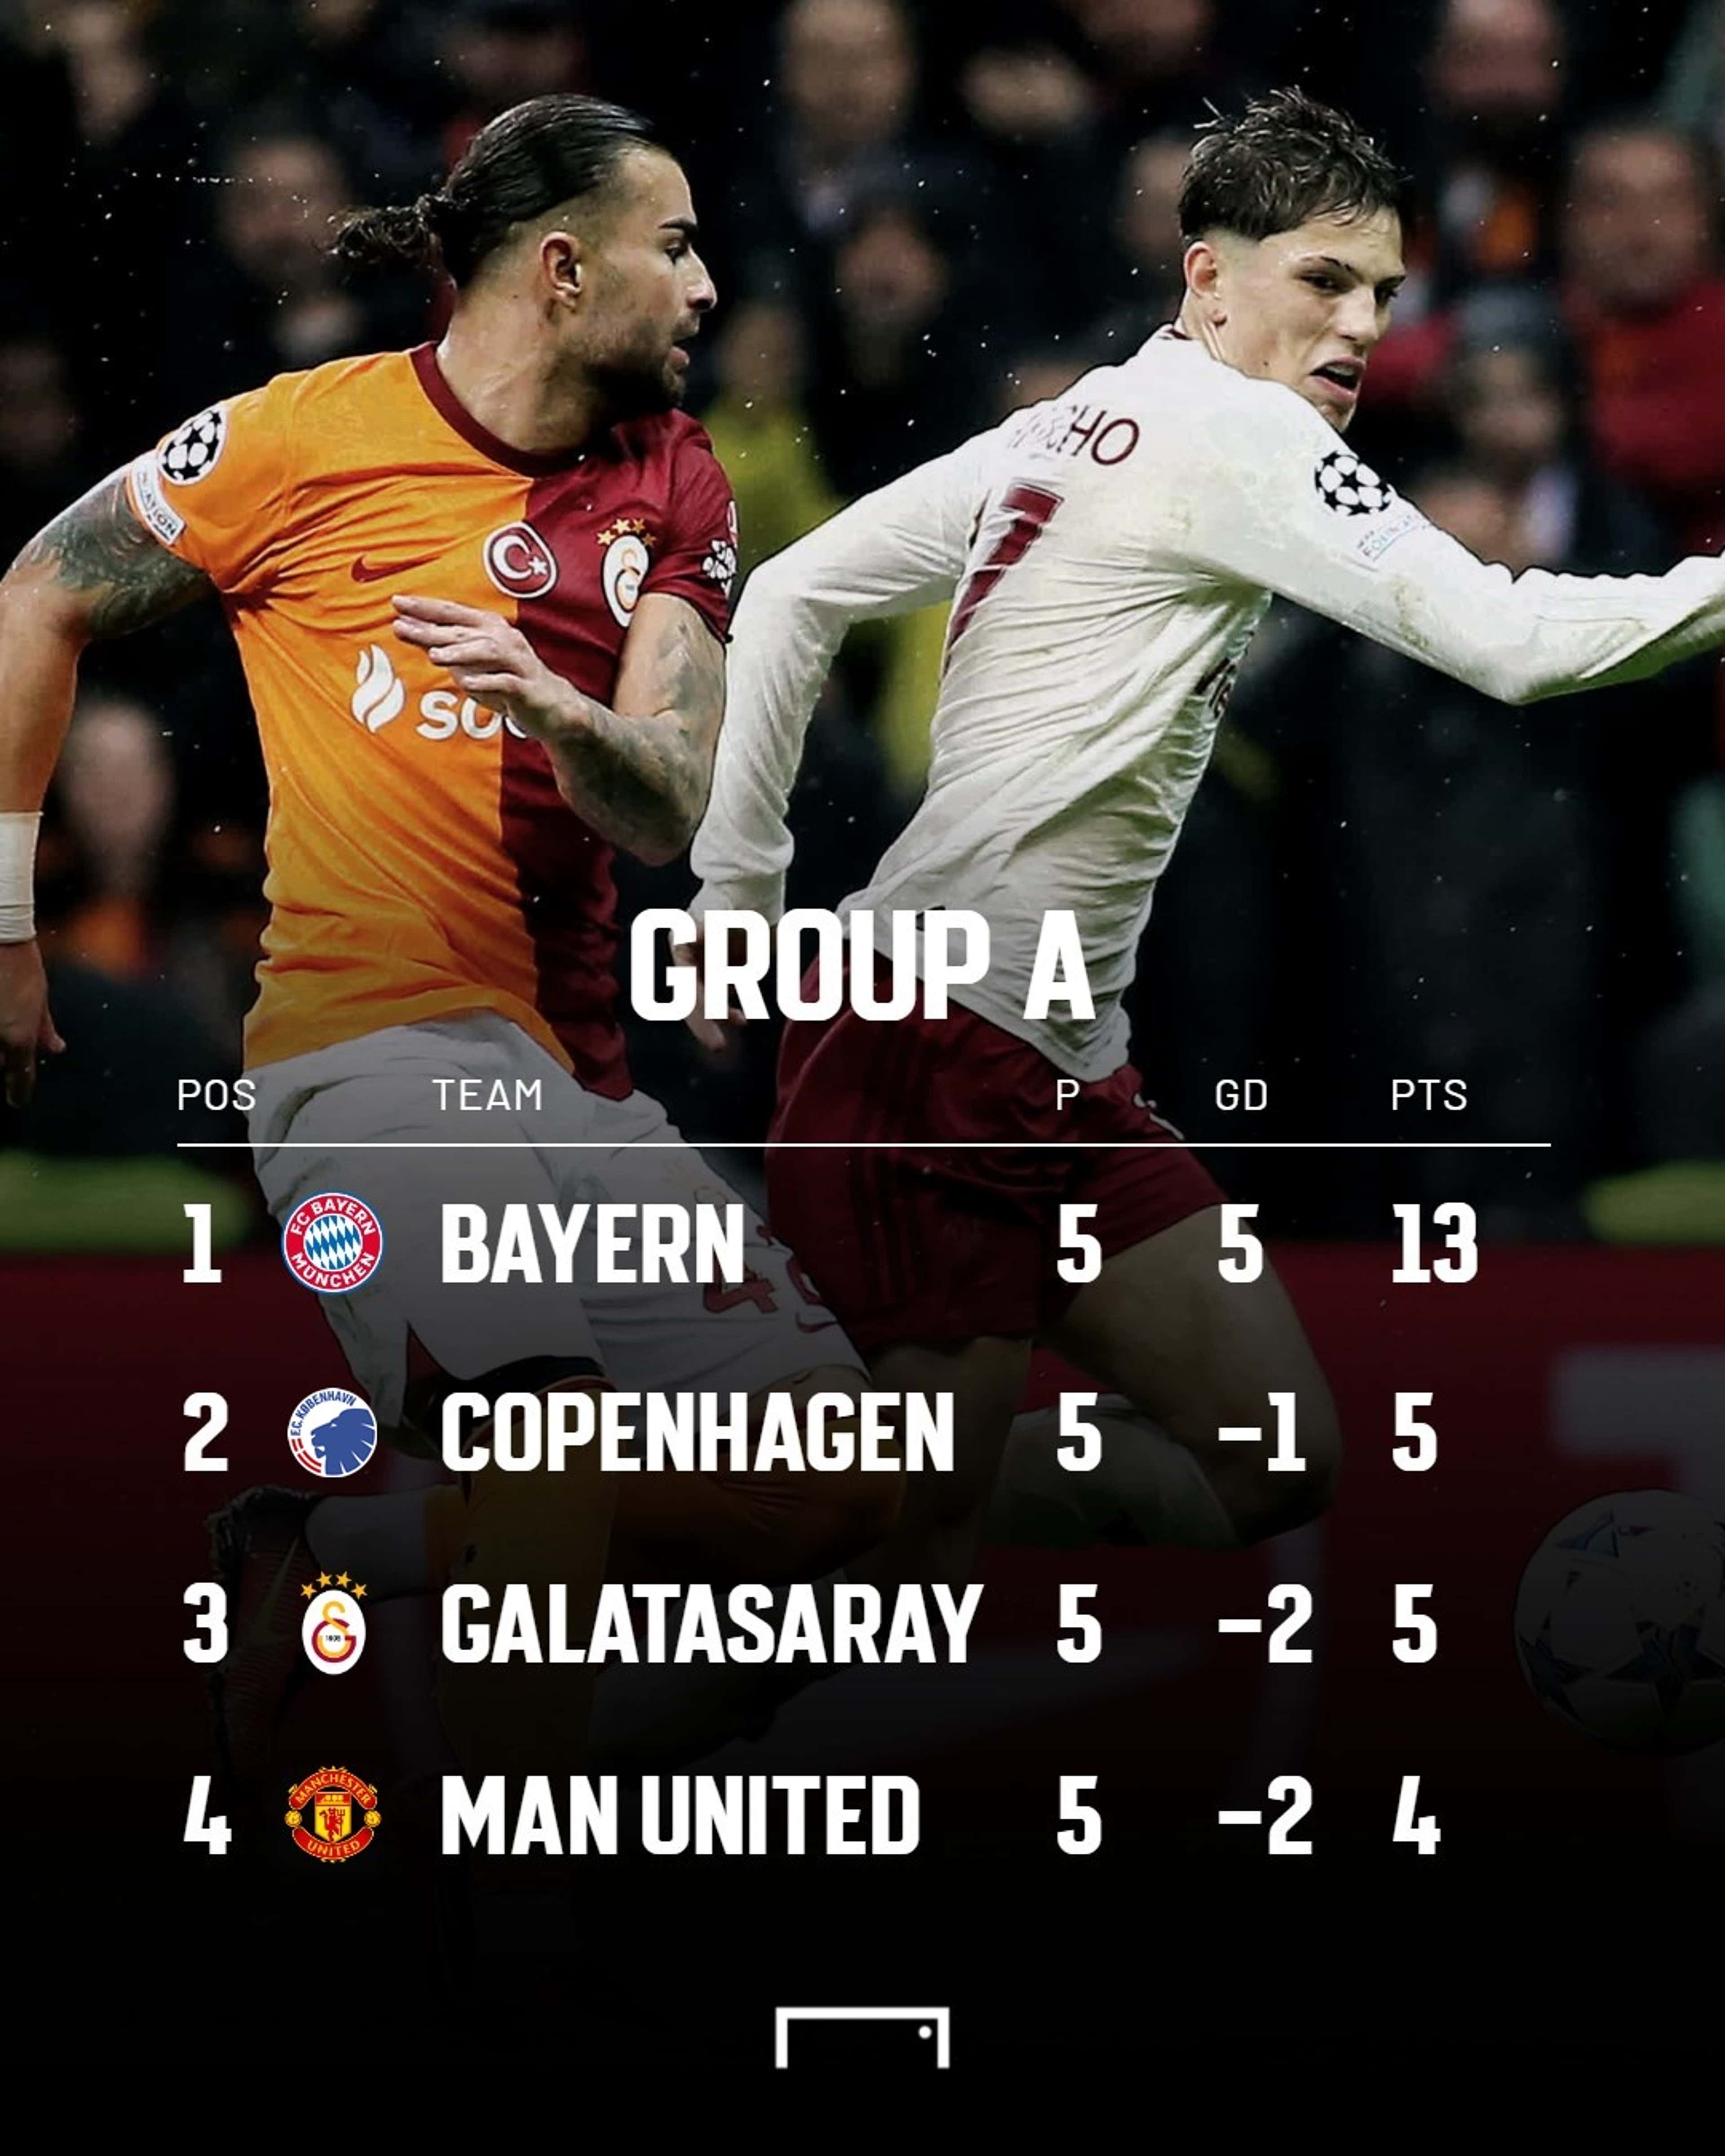 GROUP A Standing